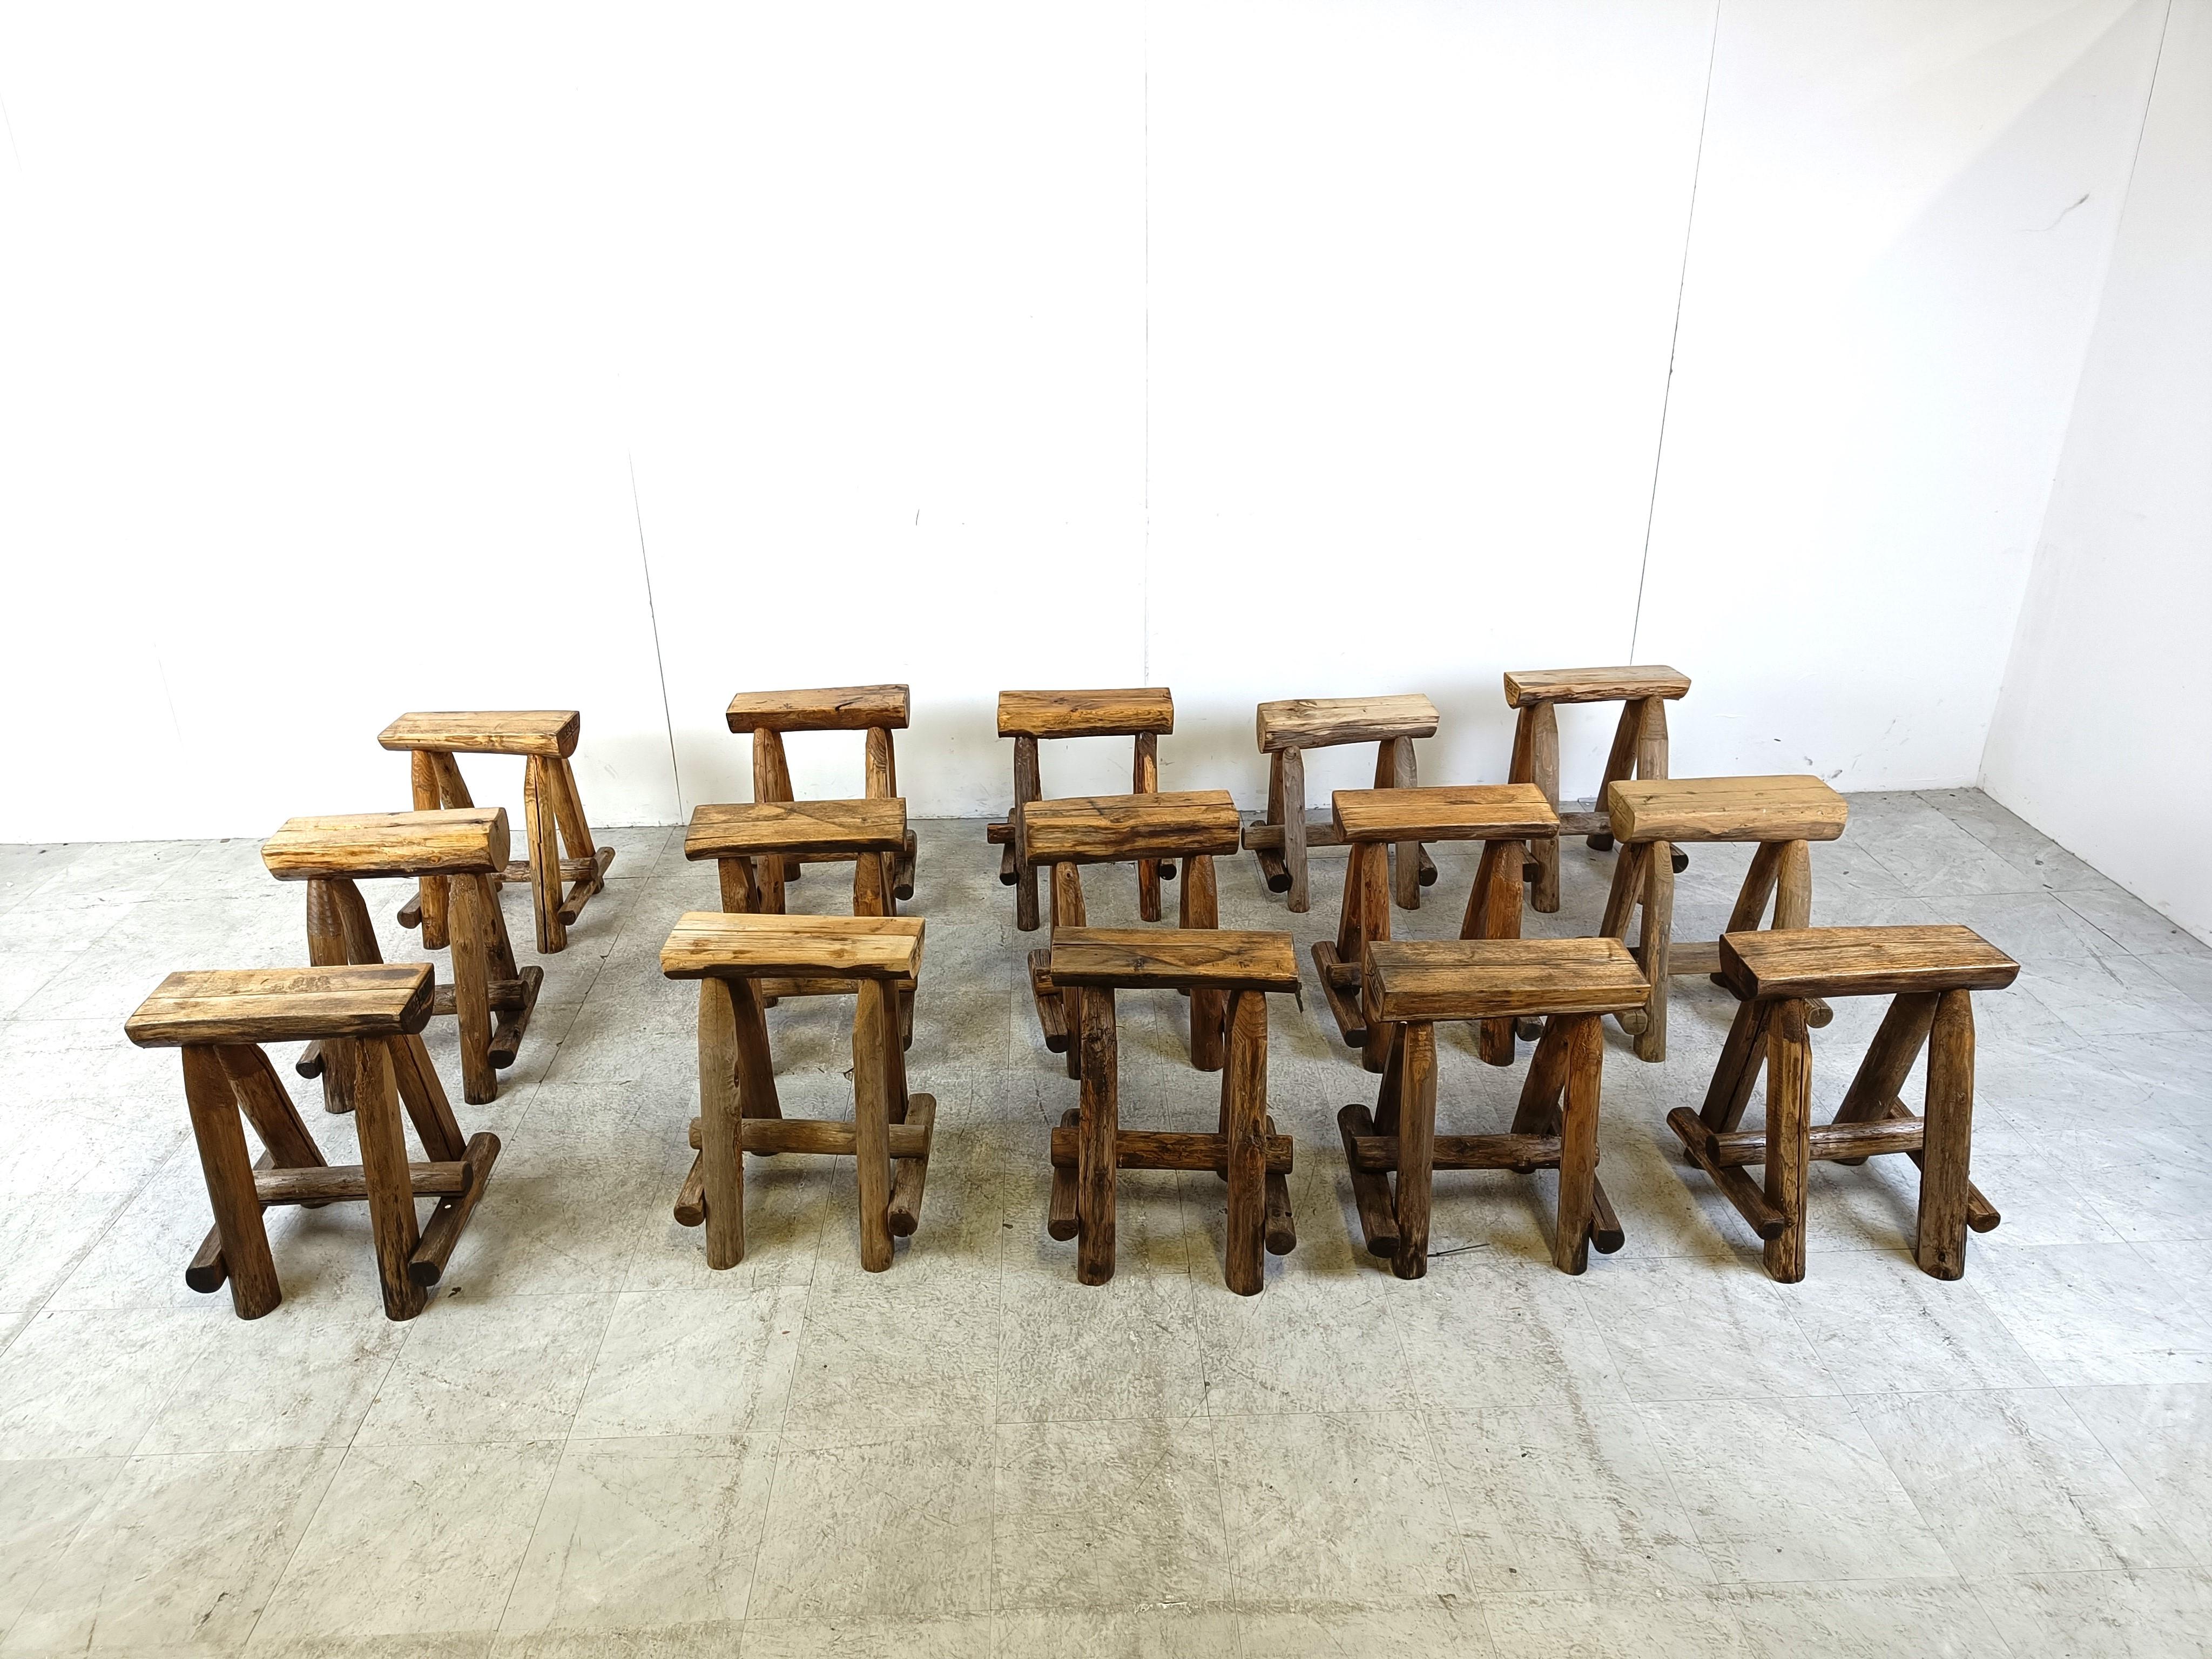 Primitive and sturdy handmade oak stools

Timeless, decorative pieces

The seats are made from cut in  half tree logs.

Multiple pieces available, price is per piece

Engraved with makers mark.

1950s - Belgium

Good condition

Dimensions:
Height: